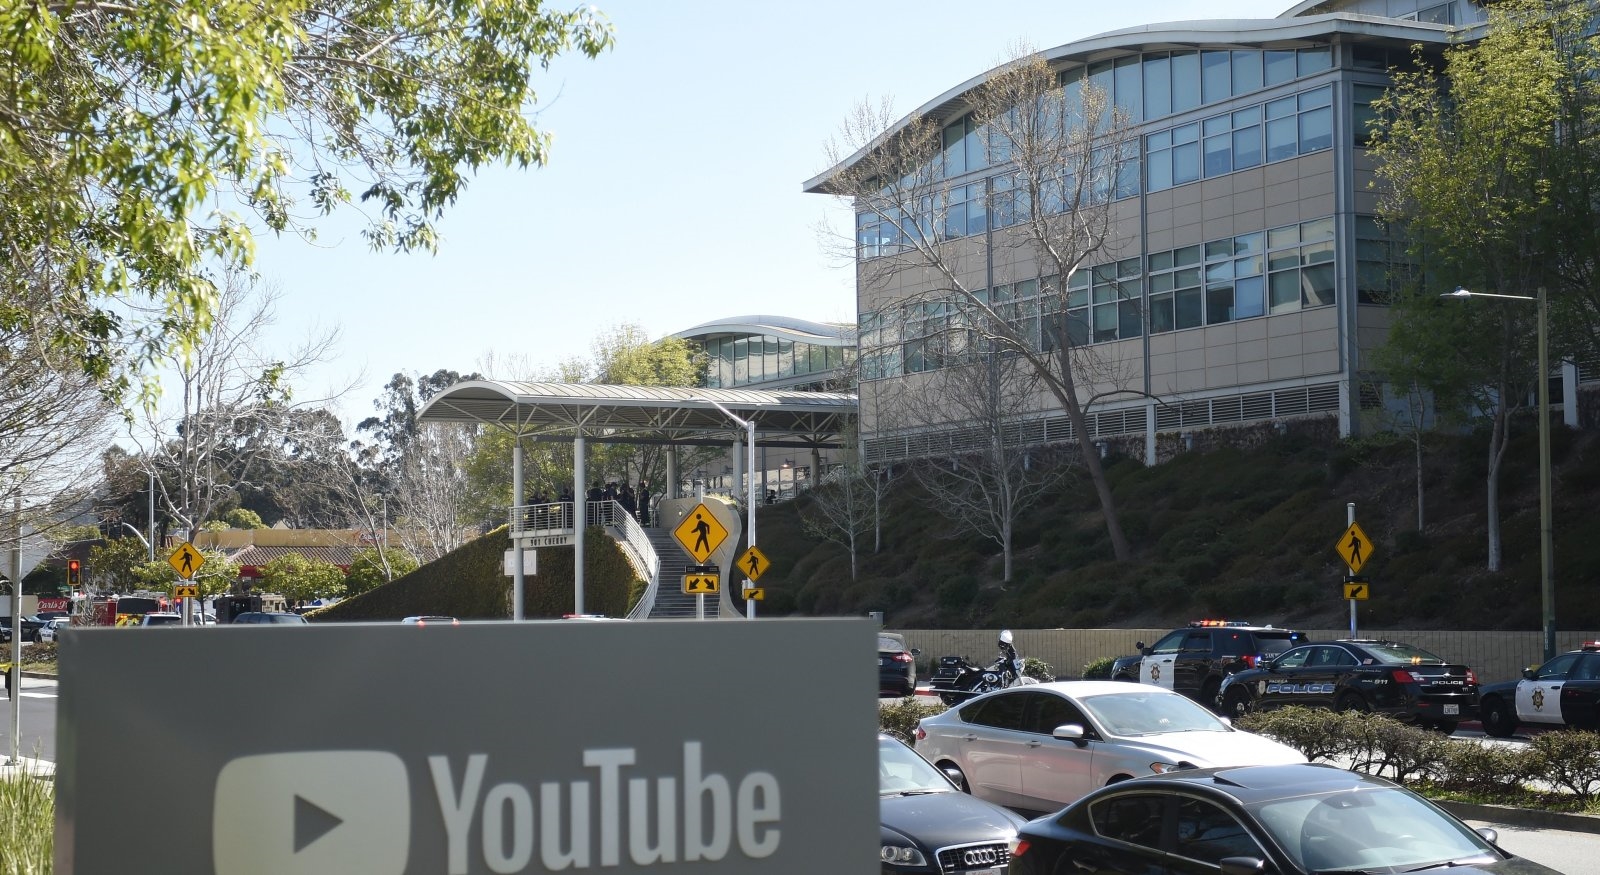 YouTube shooting suspect had been angry over filtering, demonetization | DeviceDaily.com